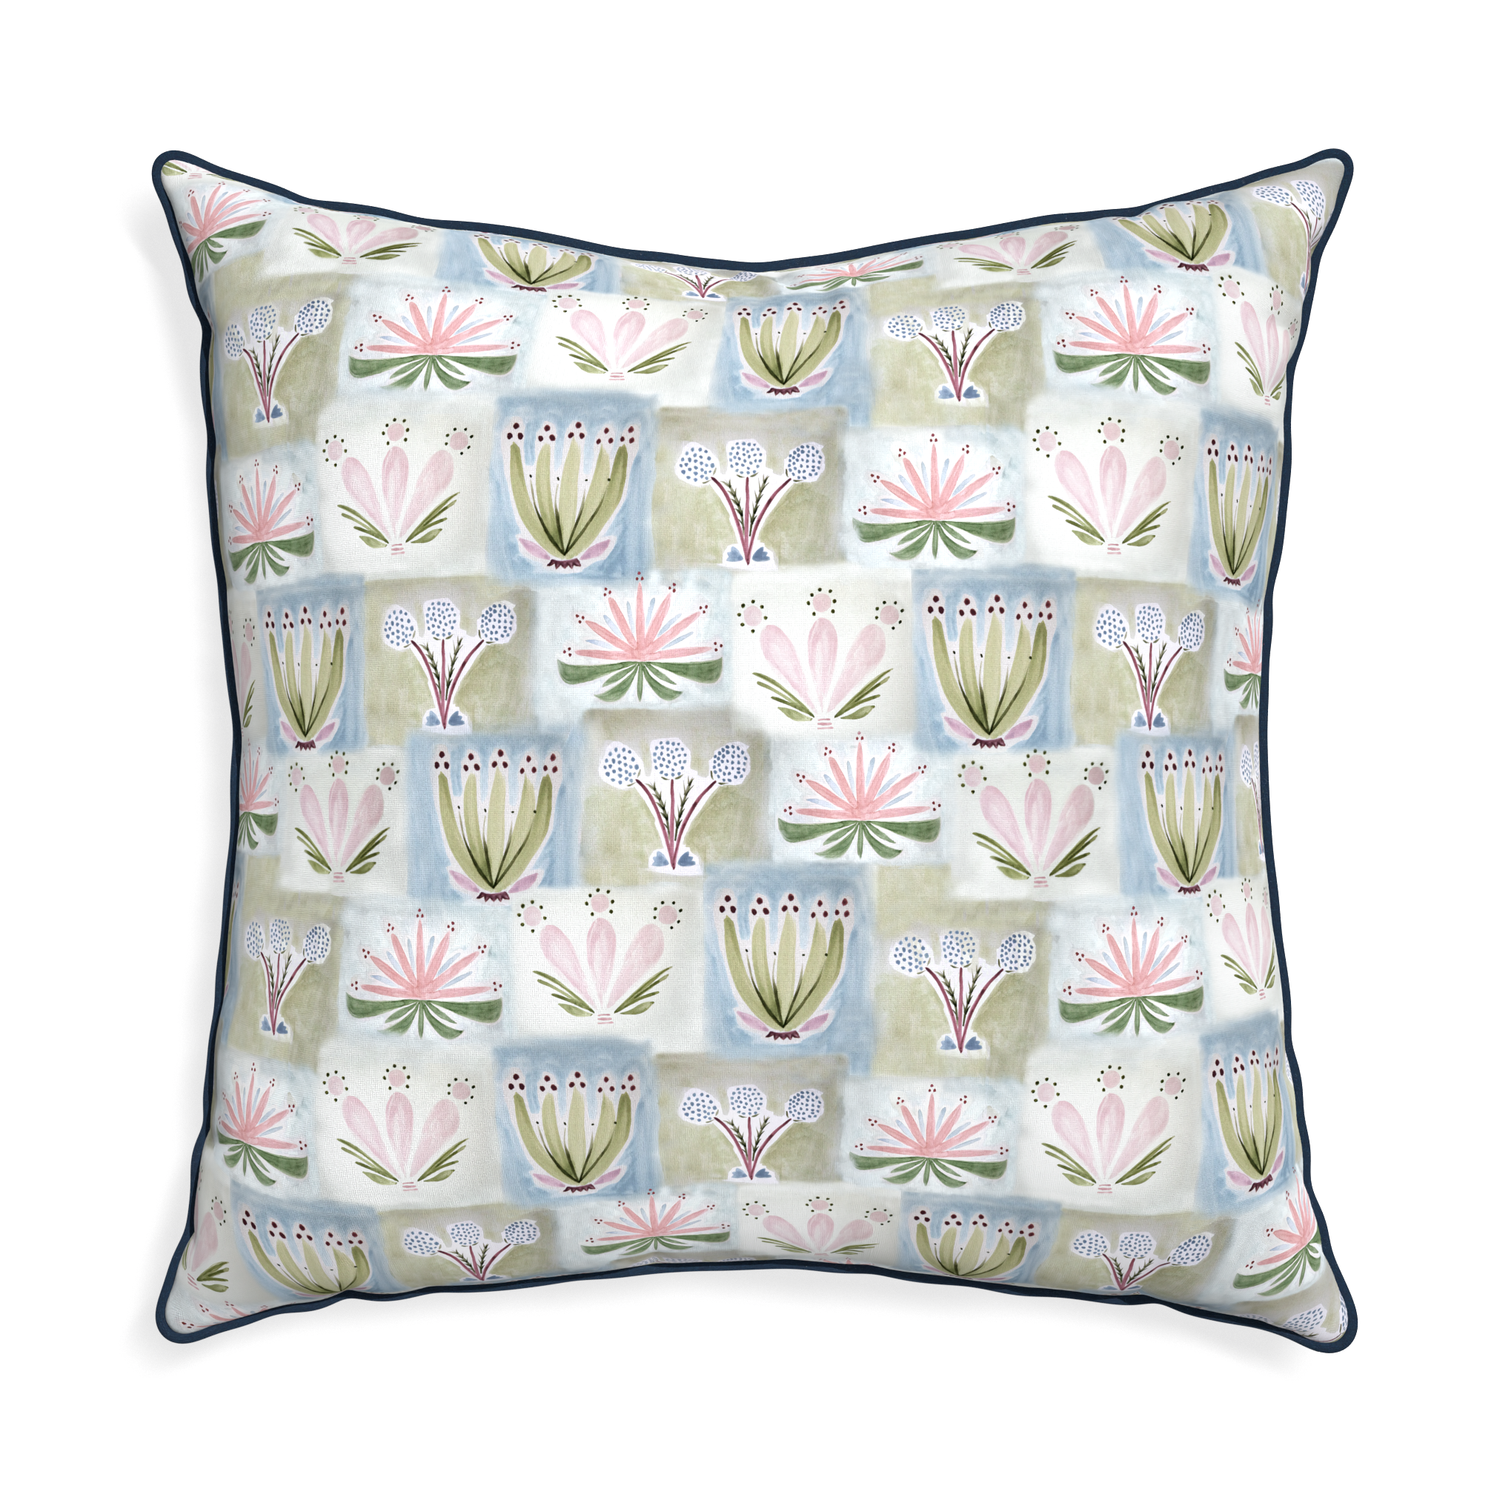 Euro-sham harper custom hand-painted floralpillow with c piping on white background